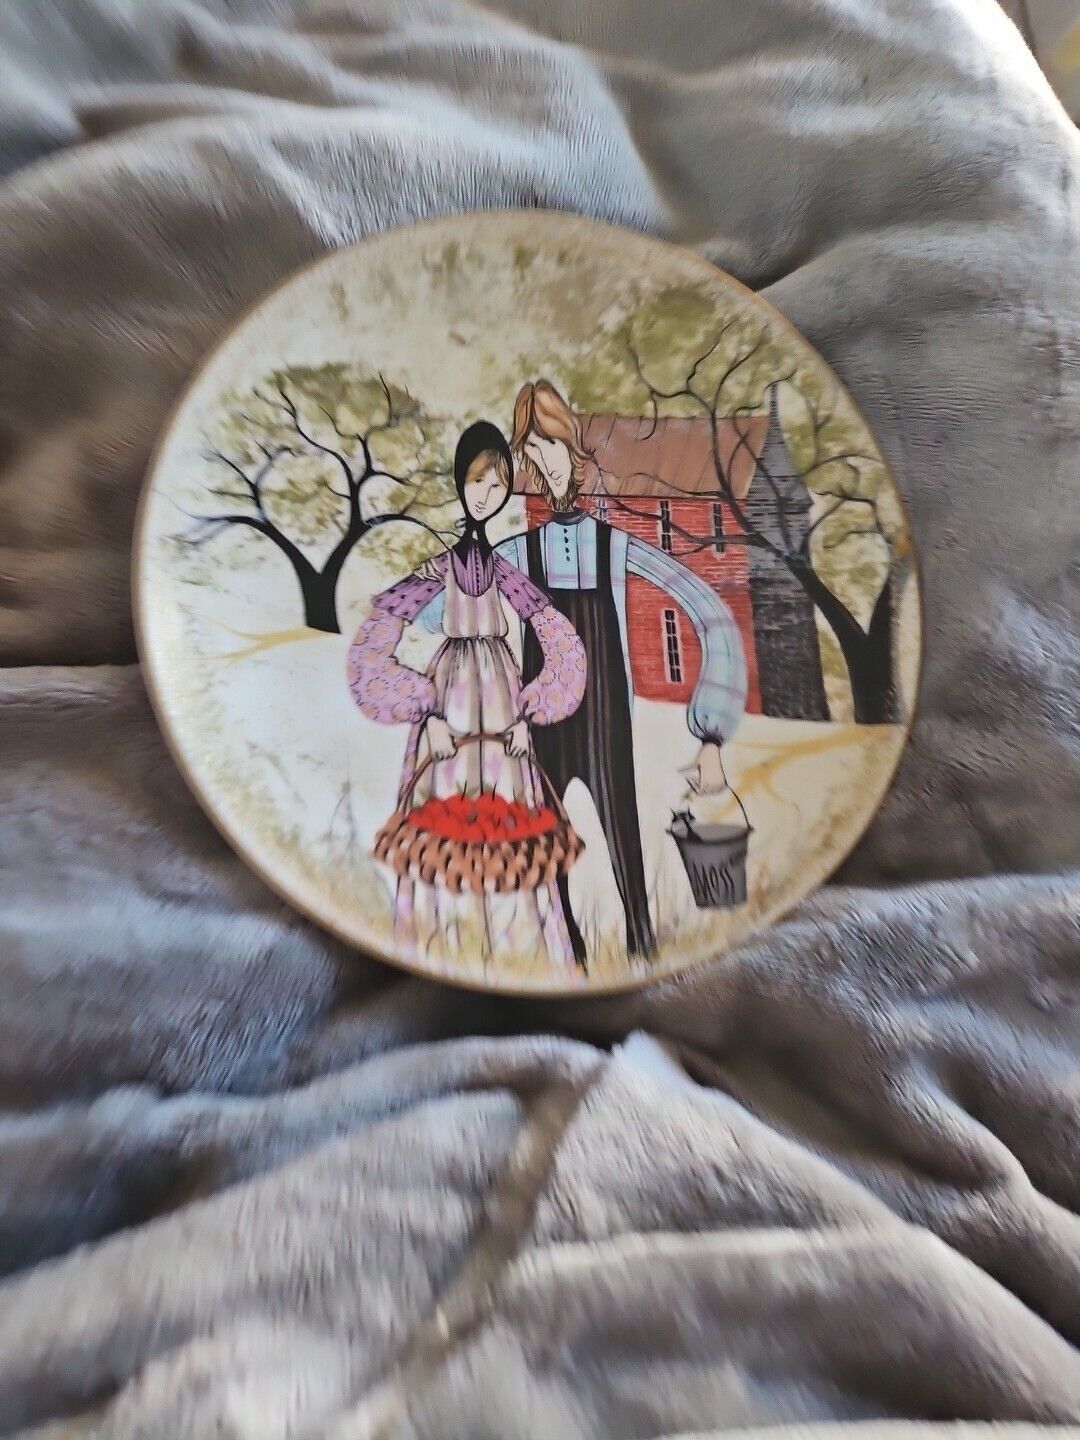 P Buckley Moss Amish Plate John Mary American Silhouette by Anne Perenna 